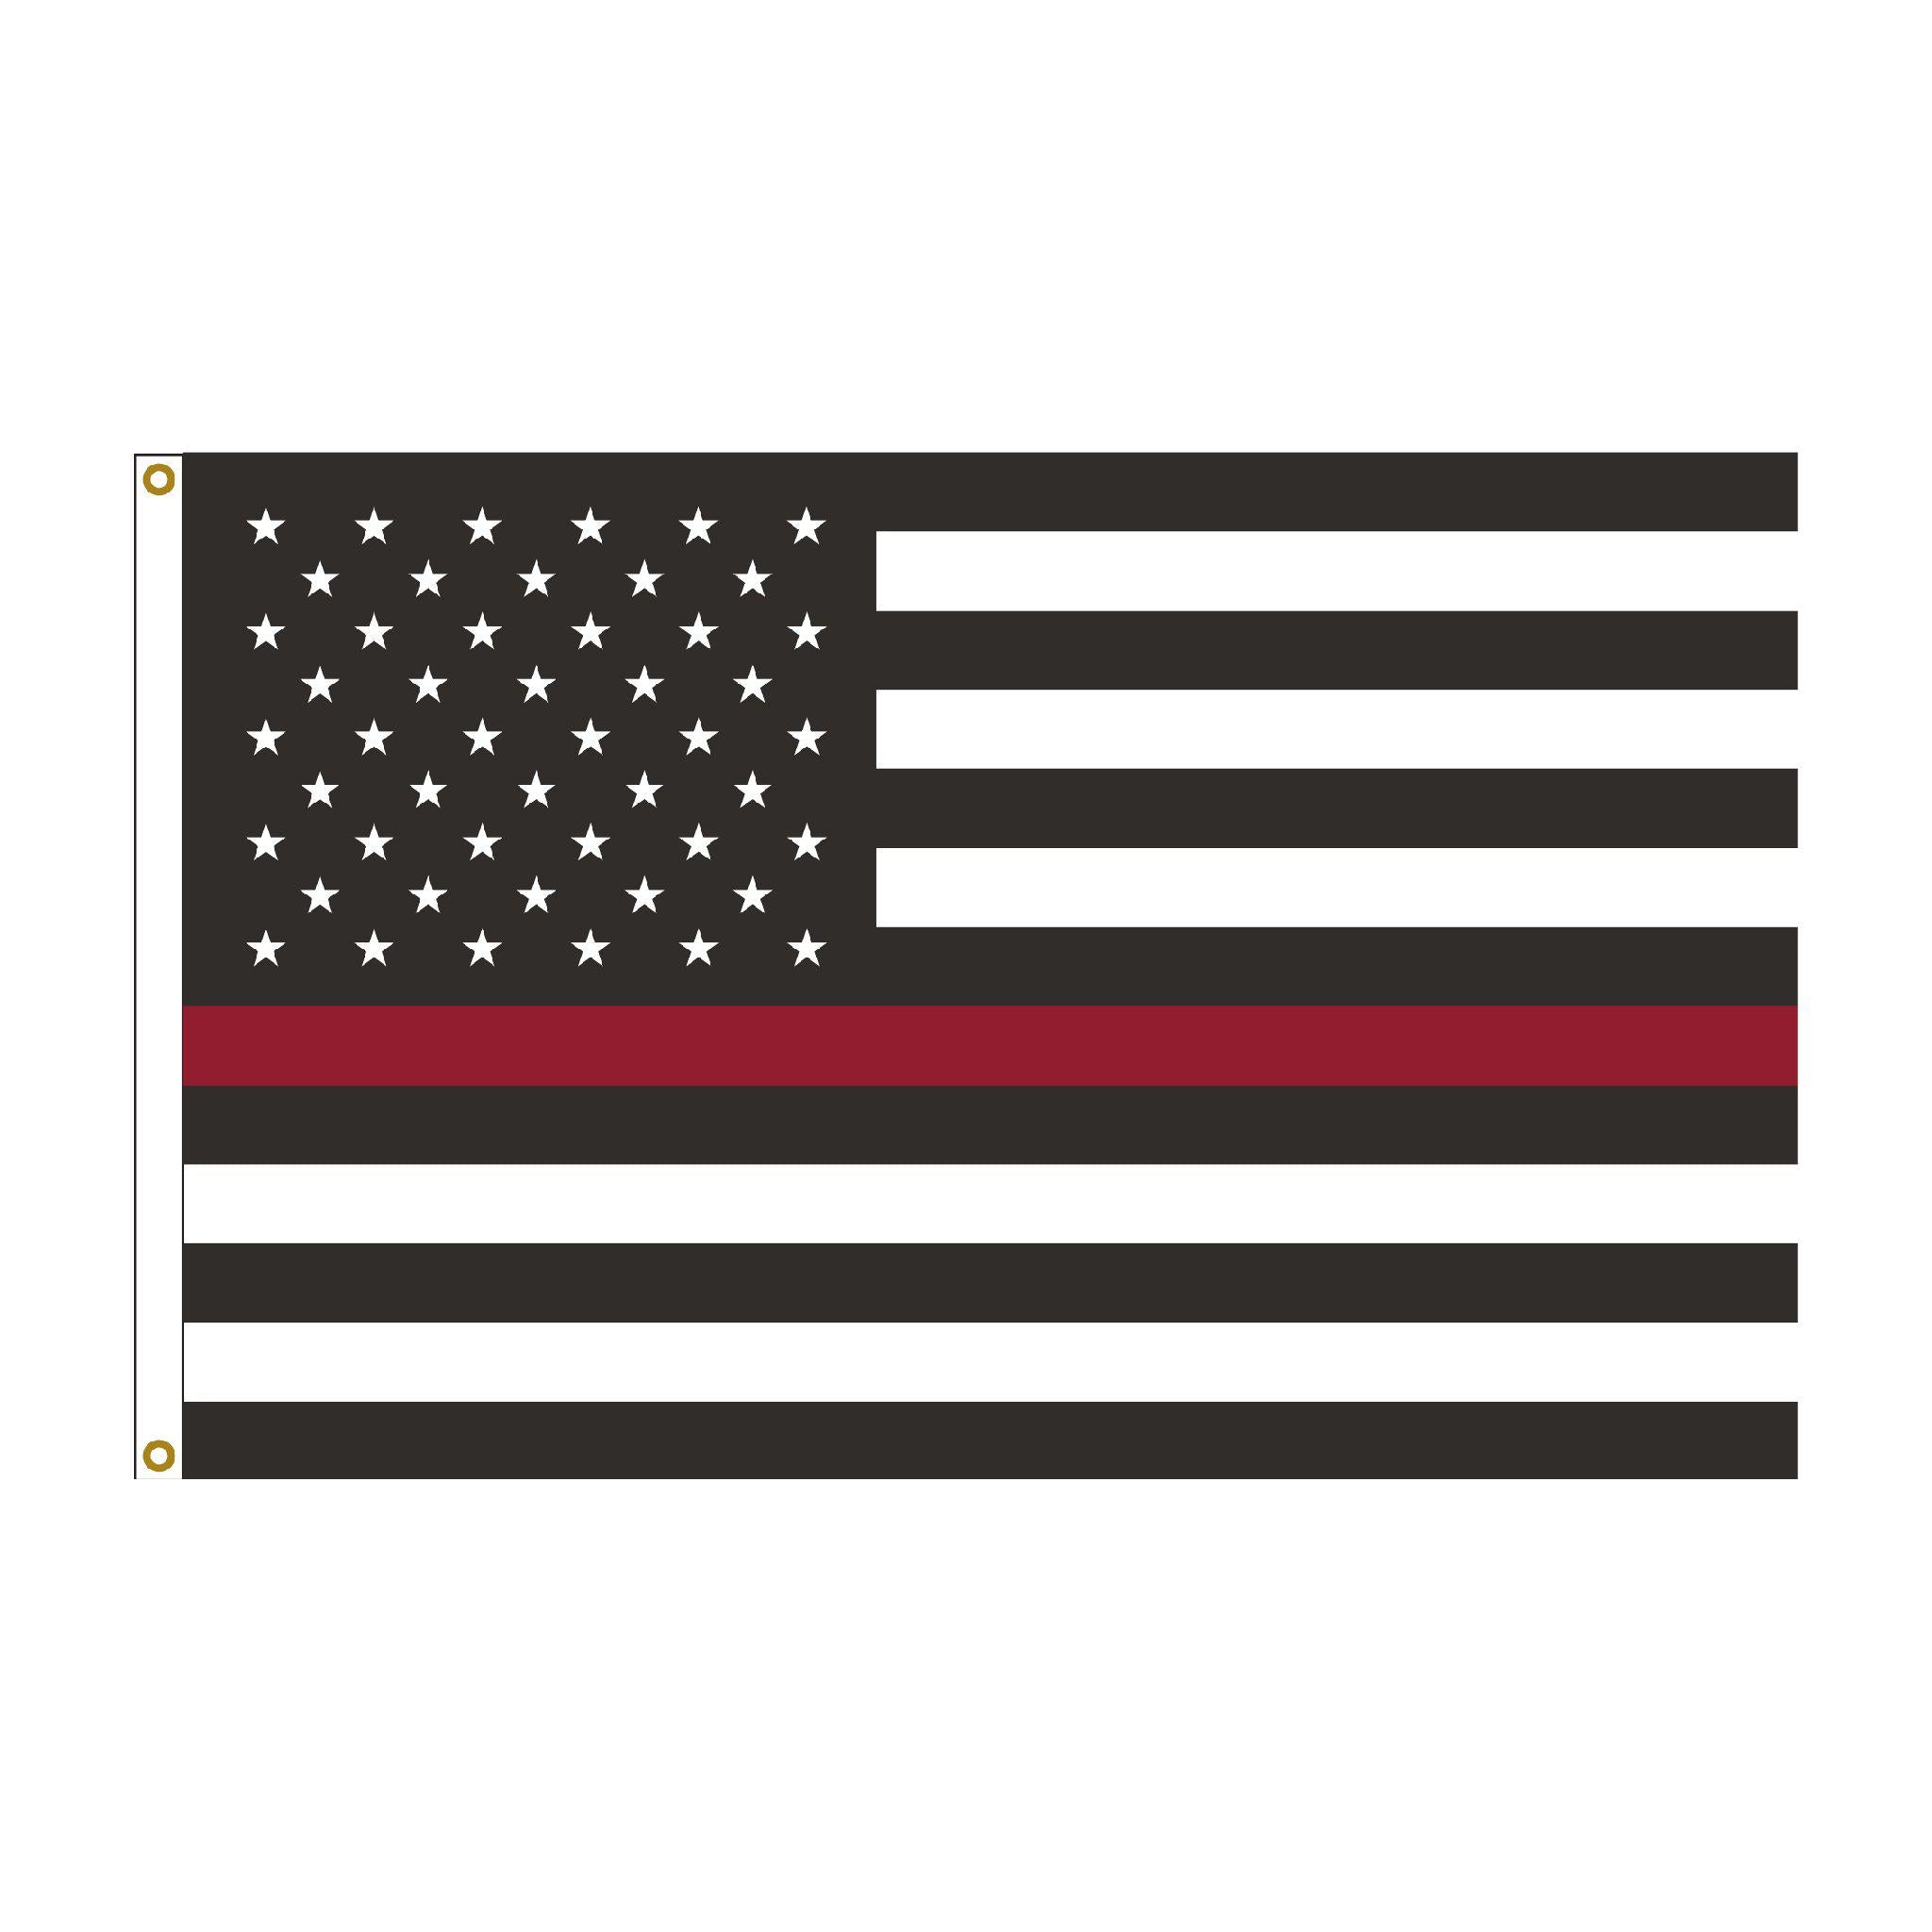 3x5 Thin Red Line U.S. flag with stars and stripes to support firefighters